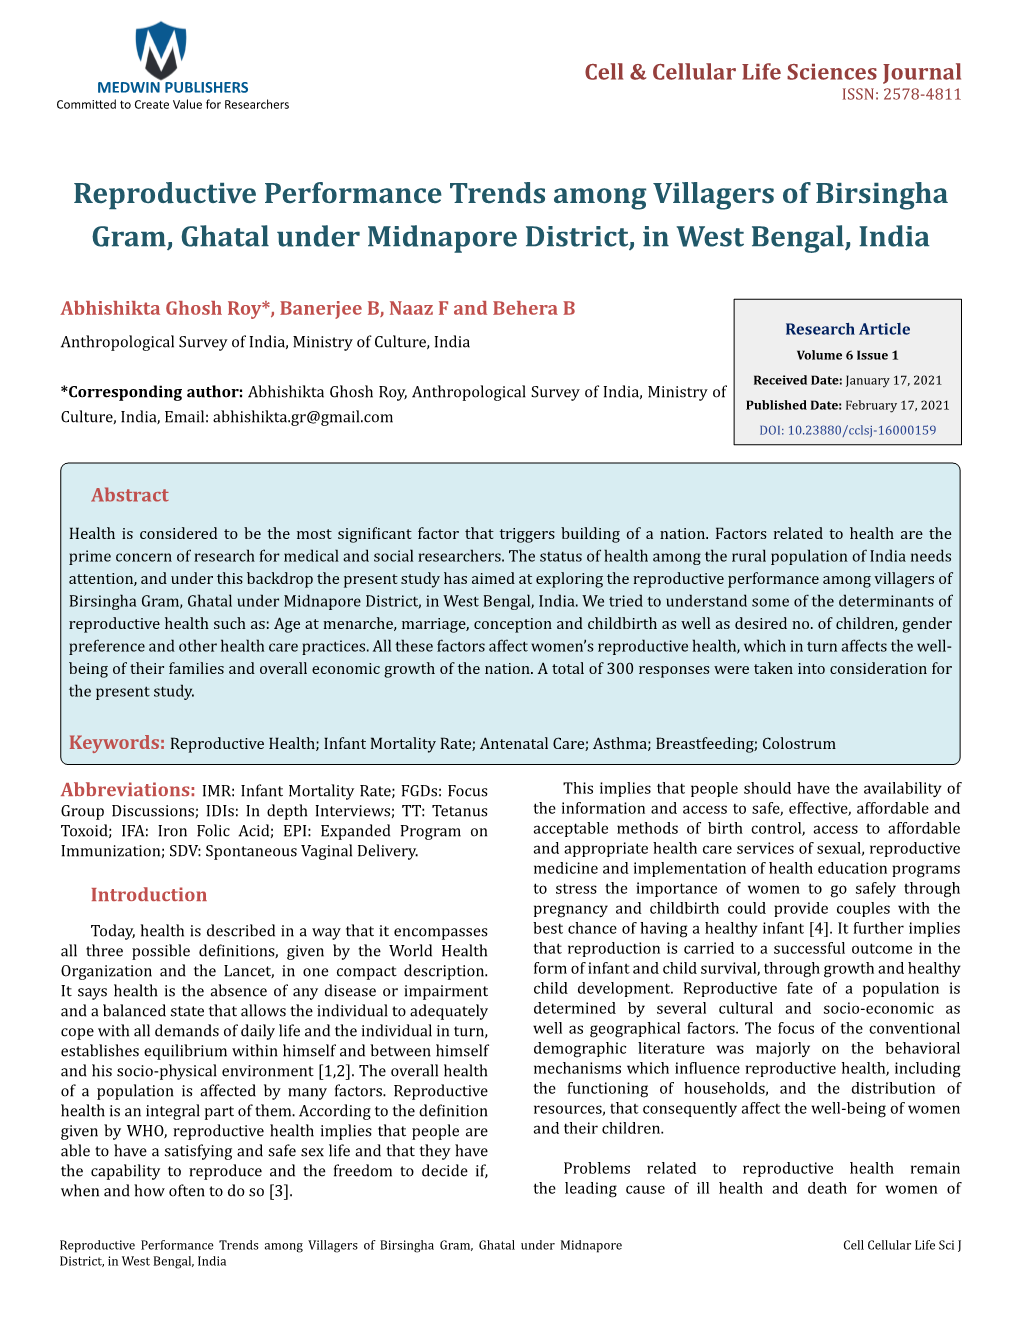 Reproductive Performance Trends Among Villagers of Birsingha Gram, Ghatal Under Midnapore District, in West Bengal, India